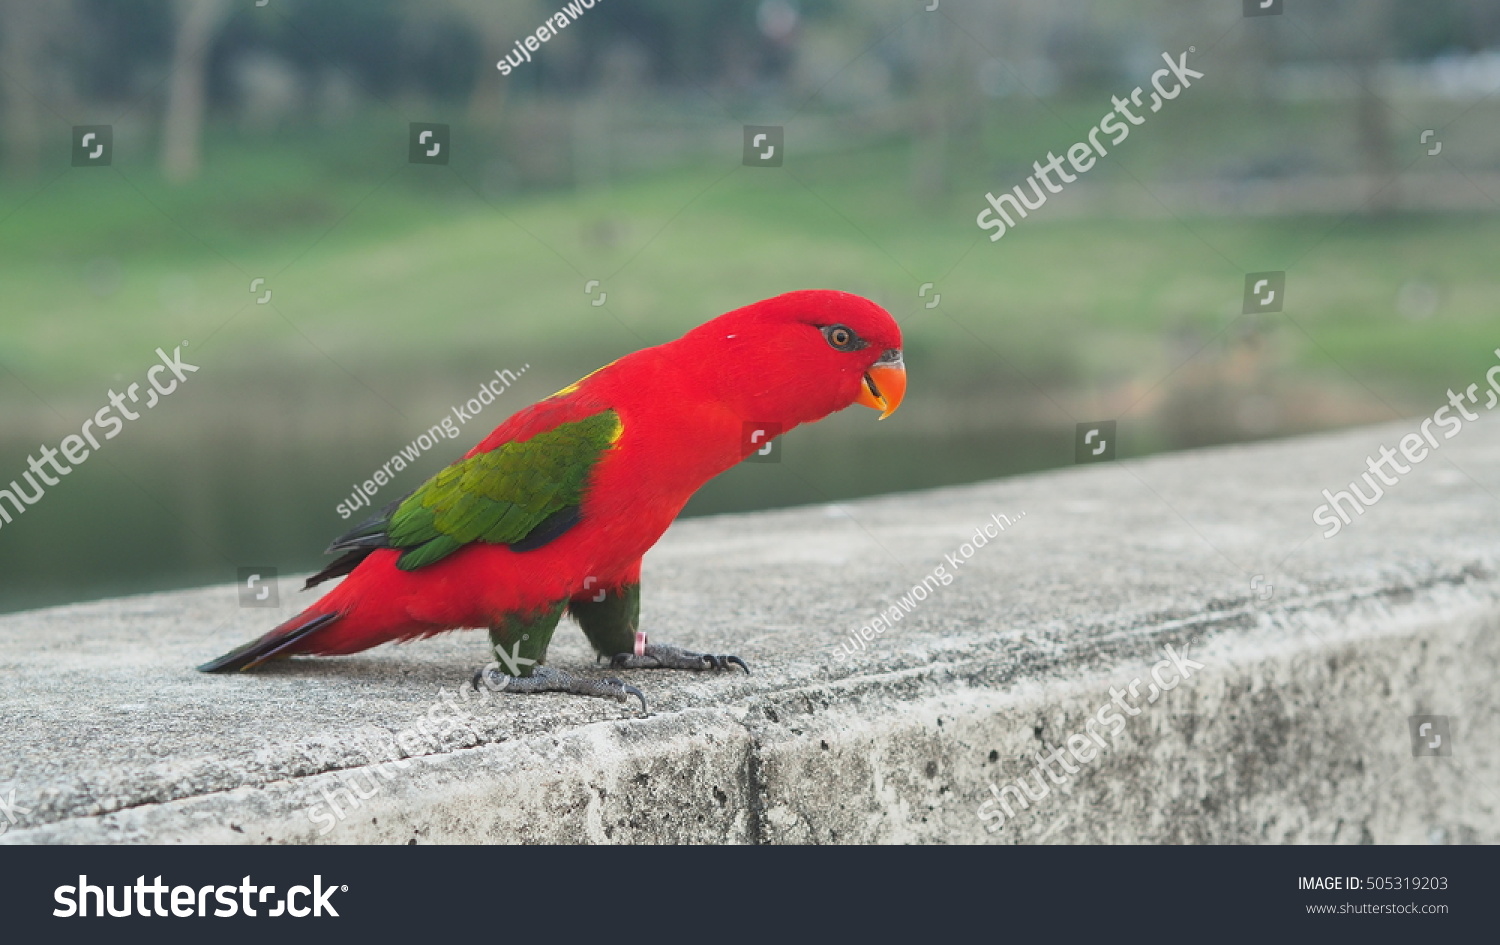 Red parrot .Lory parrot. #505319203